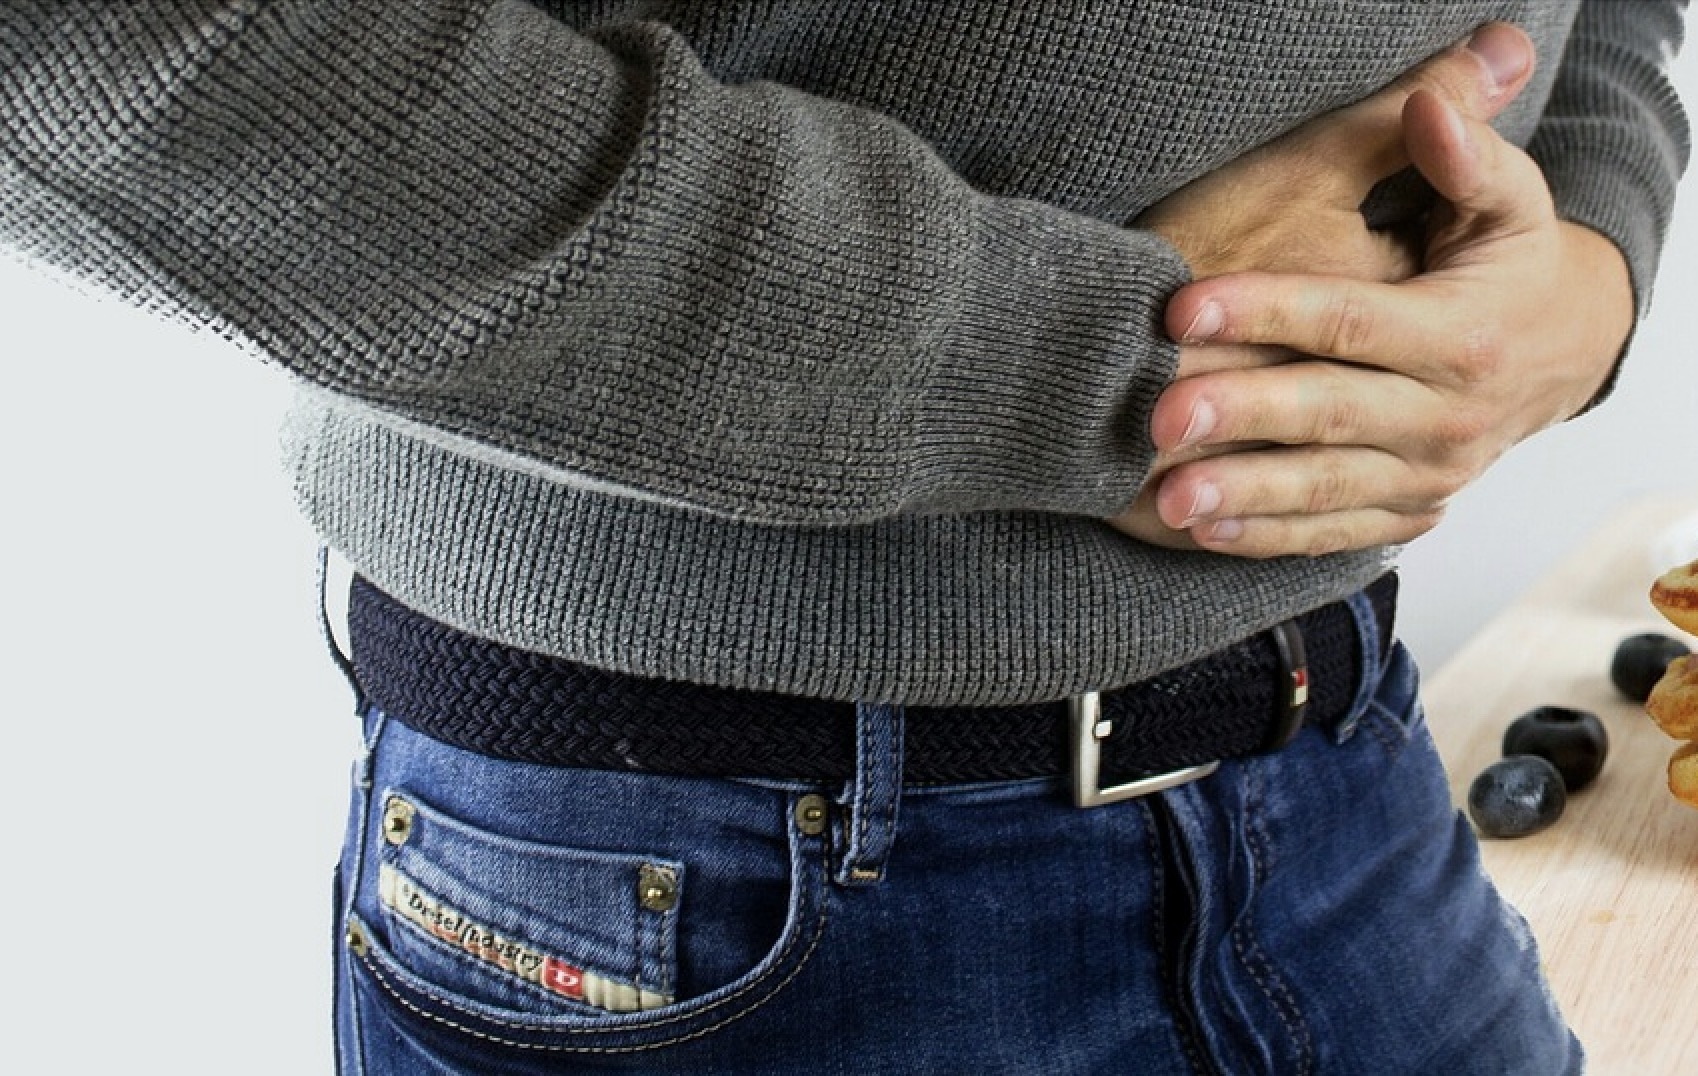 5 Ways to Keep Jeans Up without a Belt